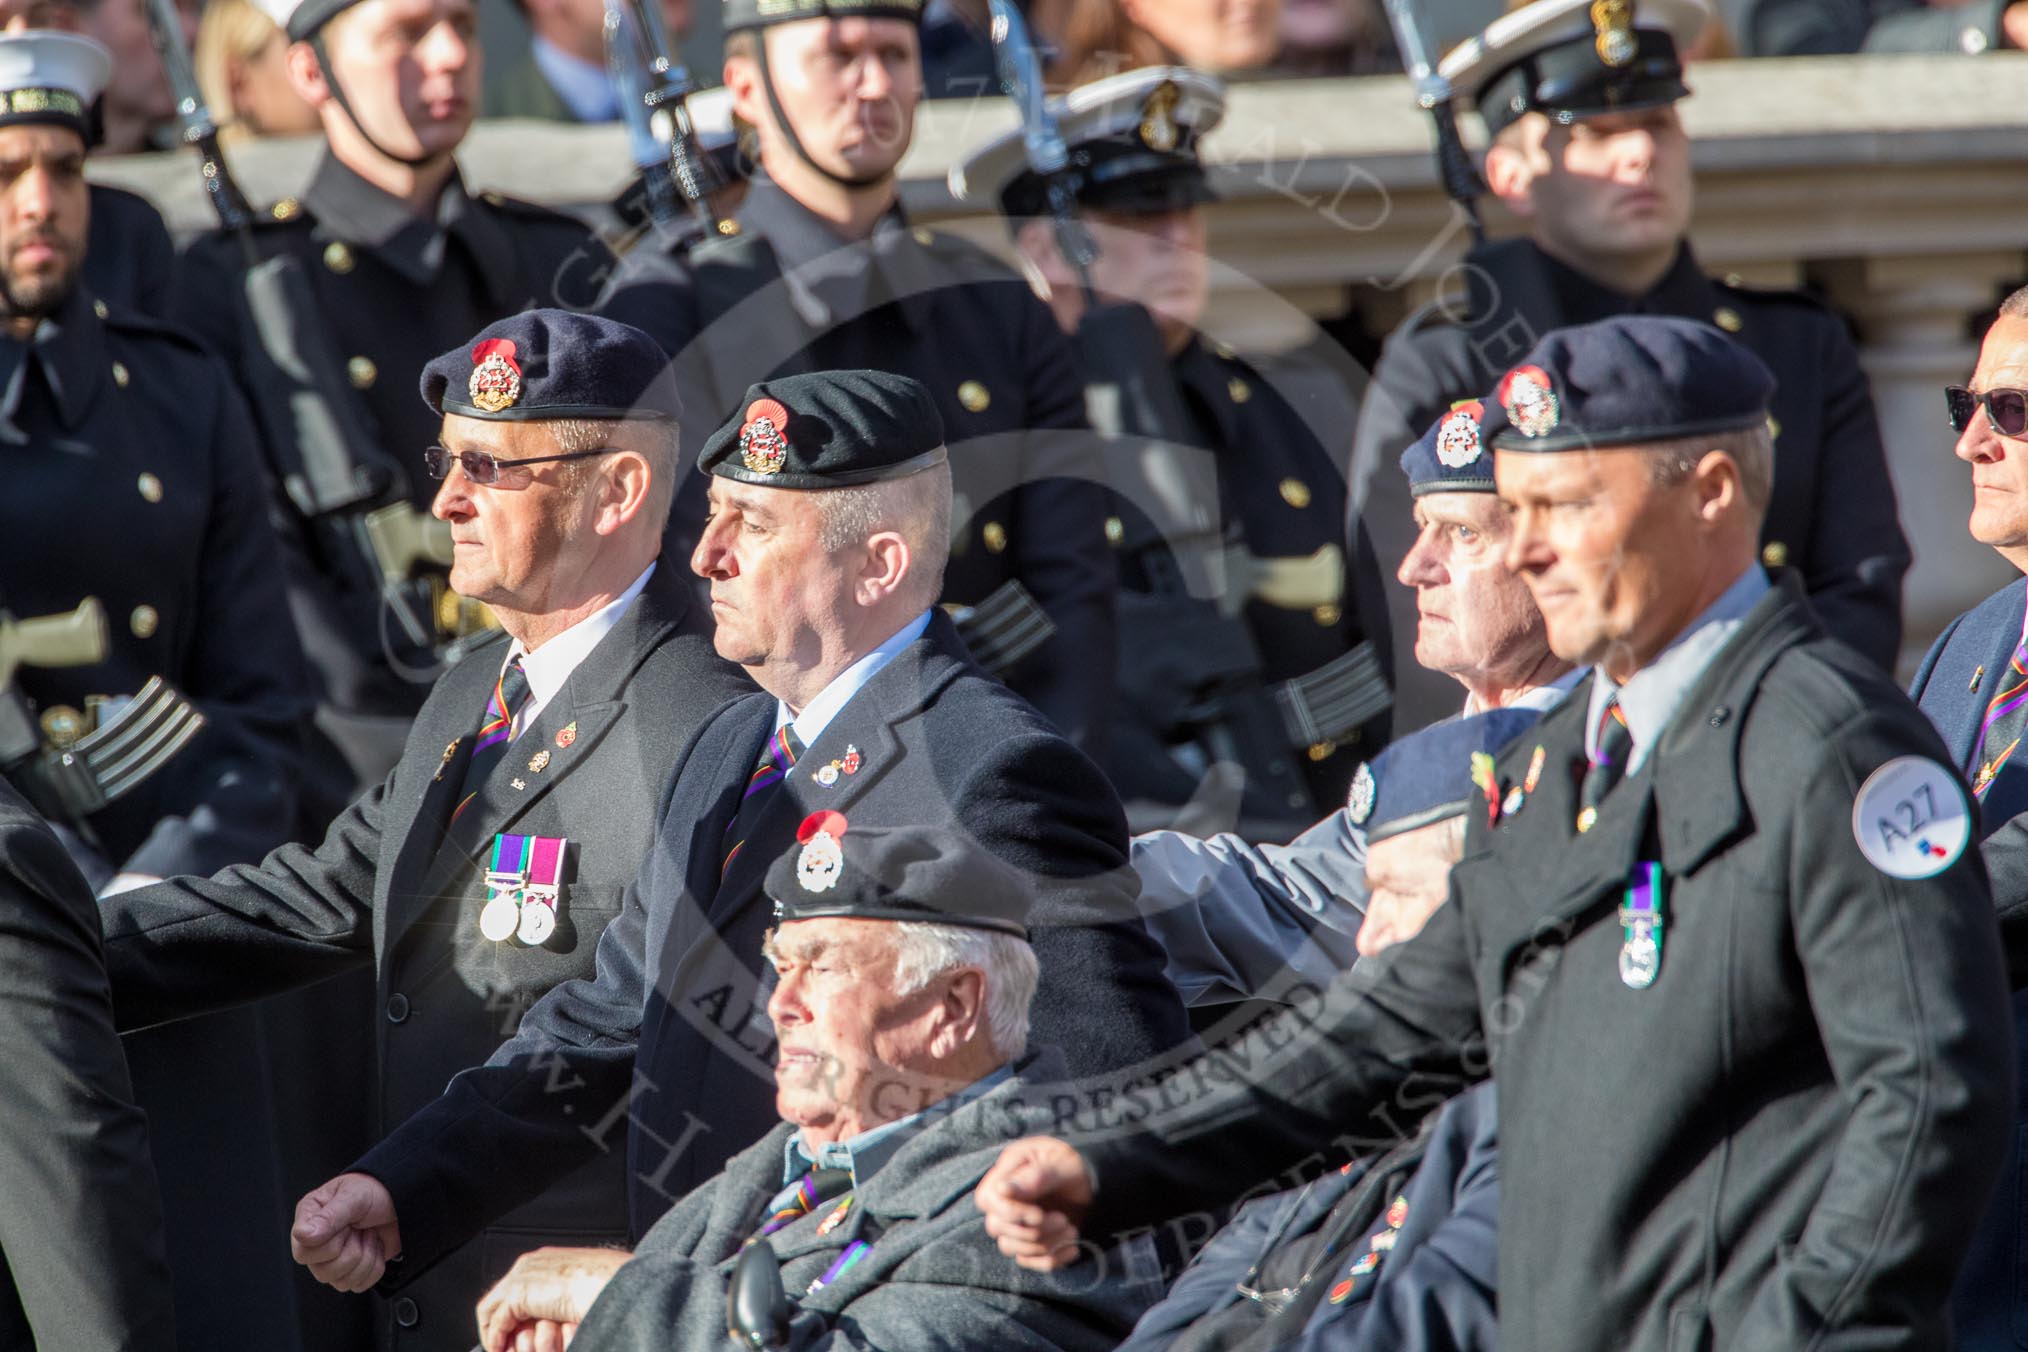 The Royal Hampshire Regimental Association (Group A27, 51 members) during the Royal British Legion March Past on Remembrance Sunday at the Cenotaph, Whitehall, Westminster, London, 11 November 2018, 12:01.